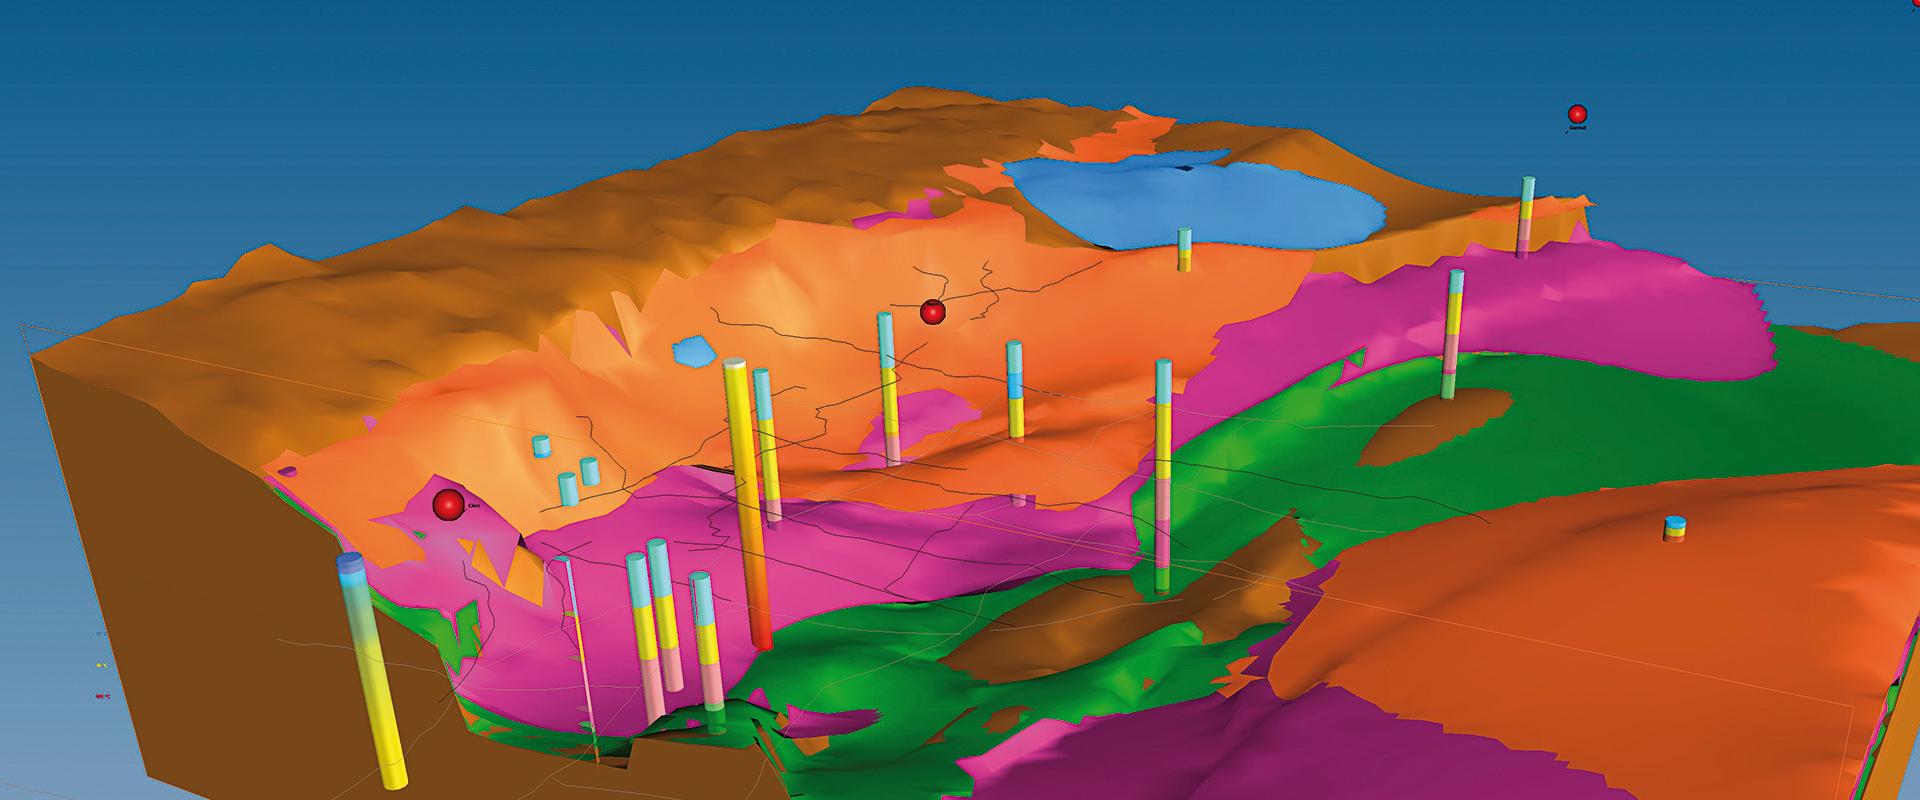 Stripped-down display from the 3D geological model of the Limagnes d’Auvergne area